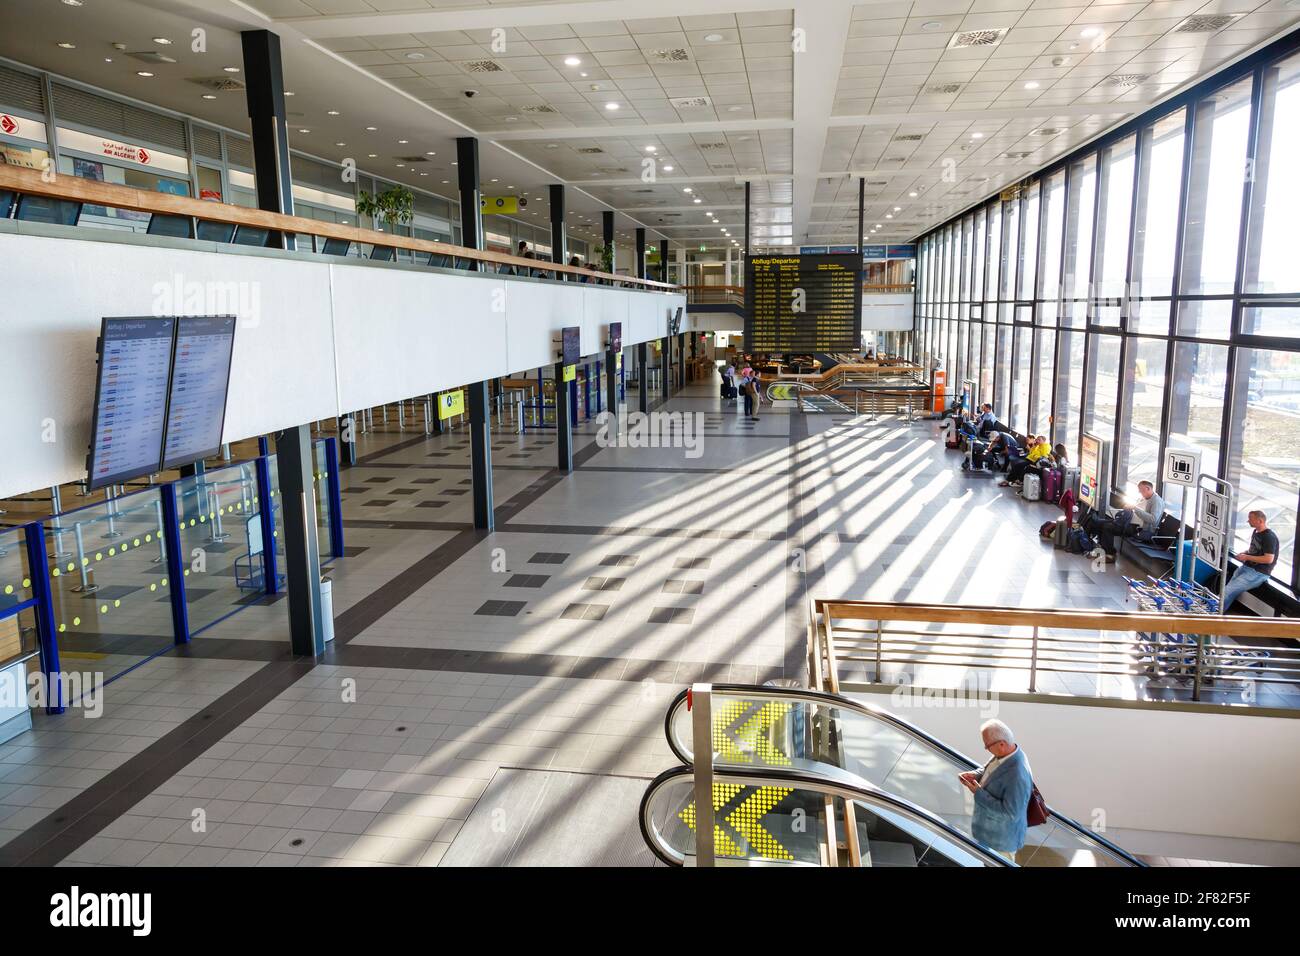 Berlin, Germany – August 29, 2017: Terminal A at Berlin Schoenefeld airport (SXF) in Germany. Stock Photo